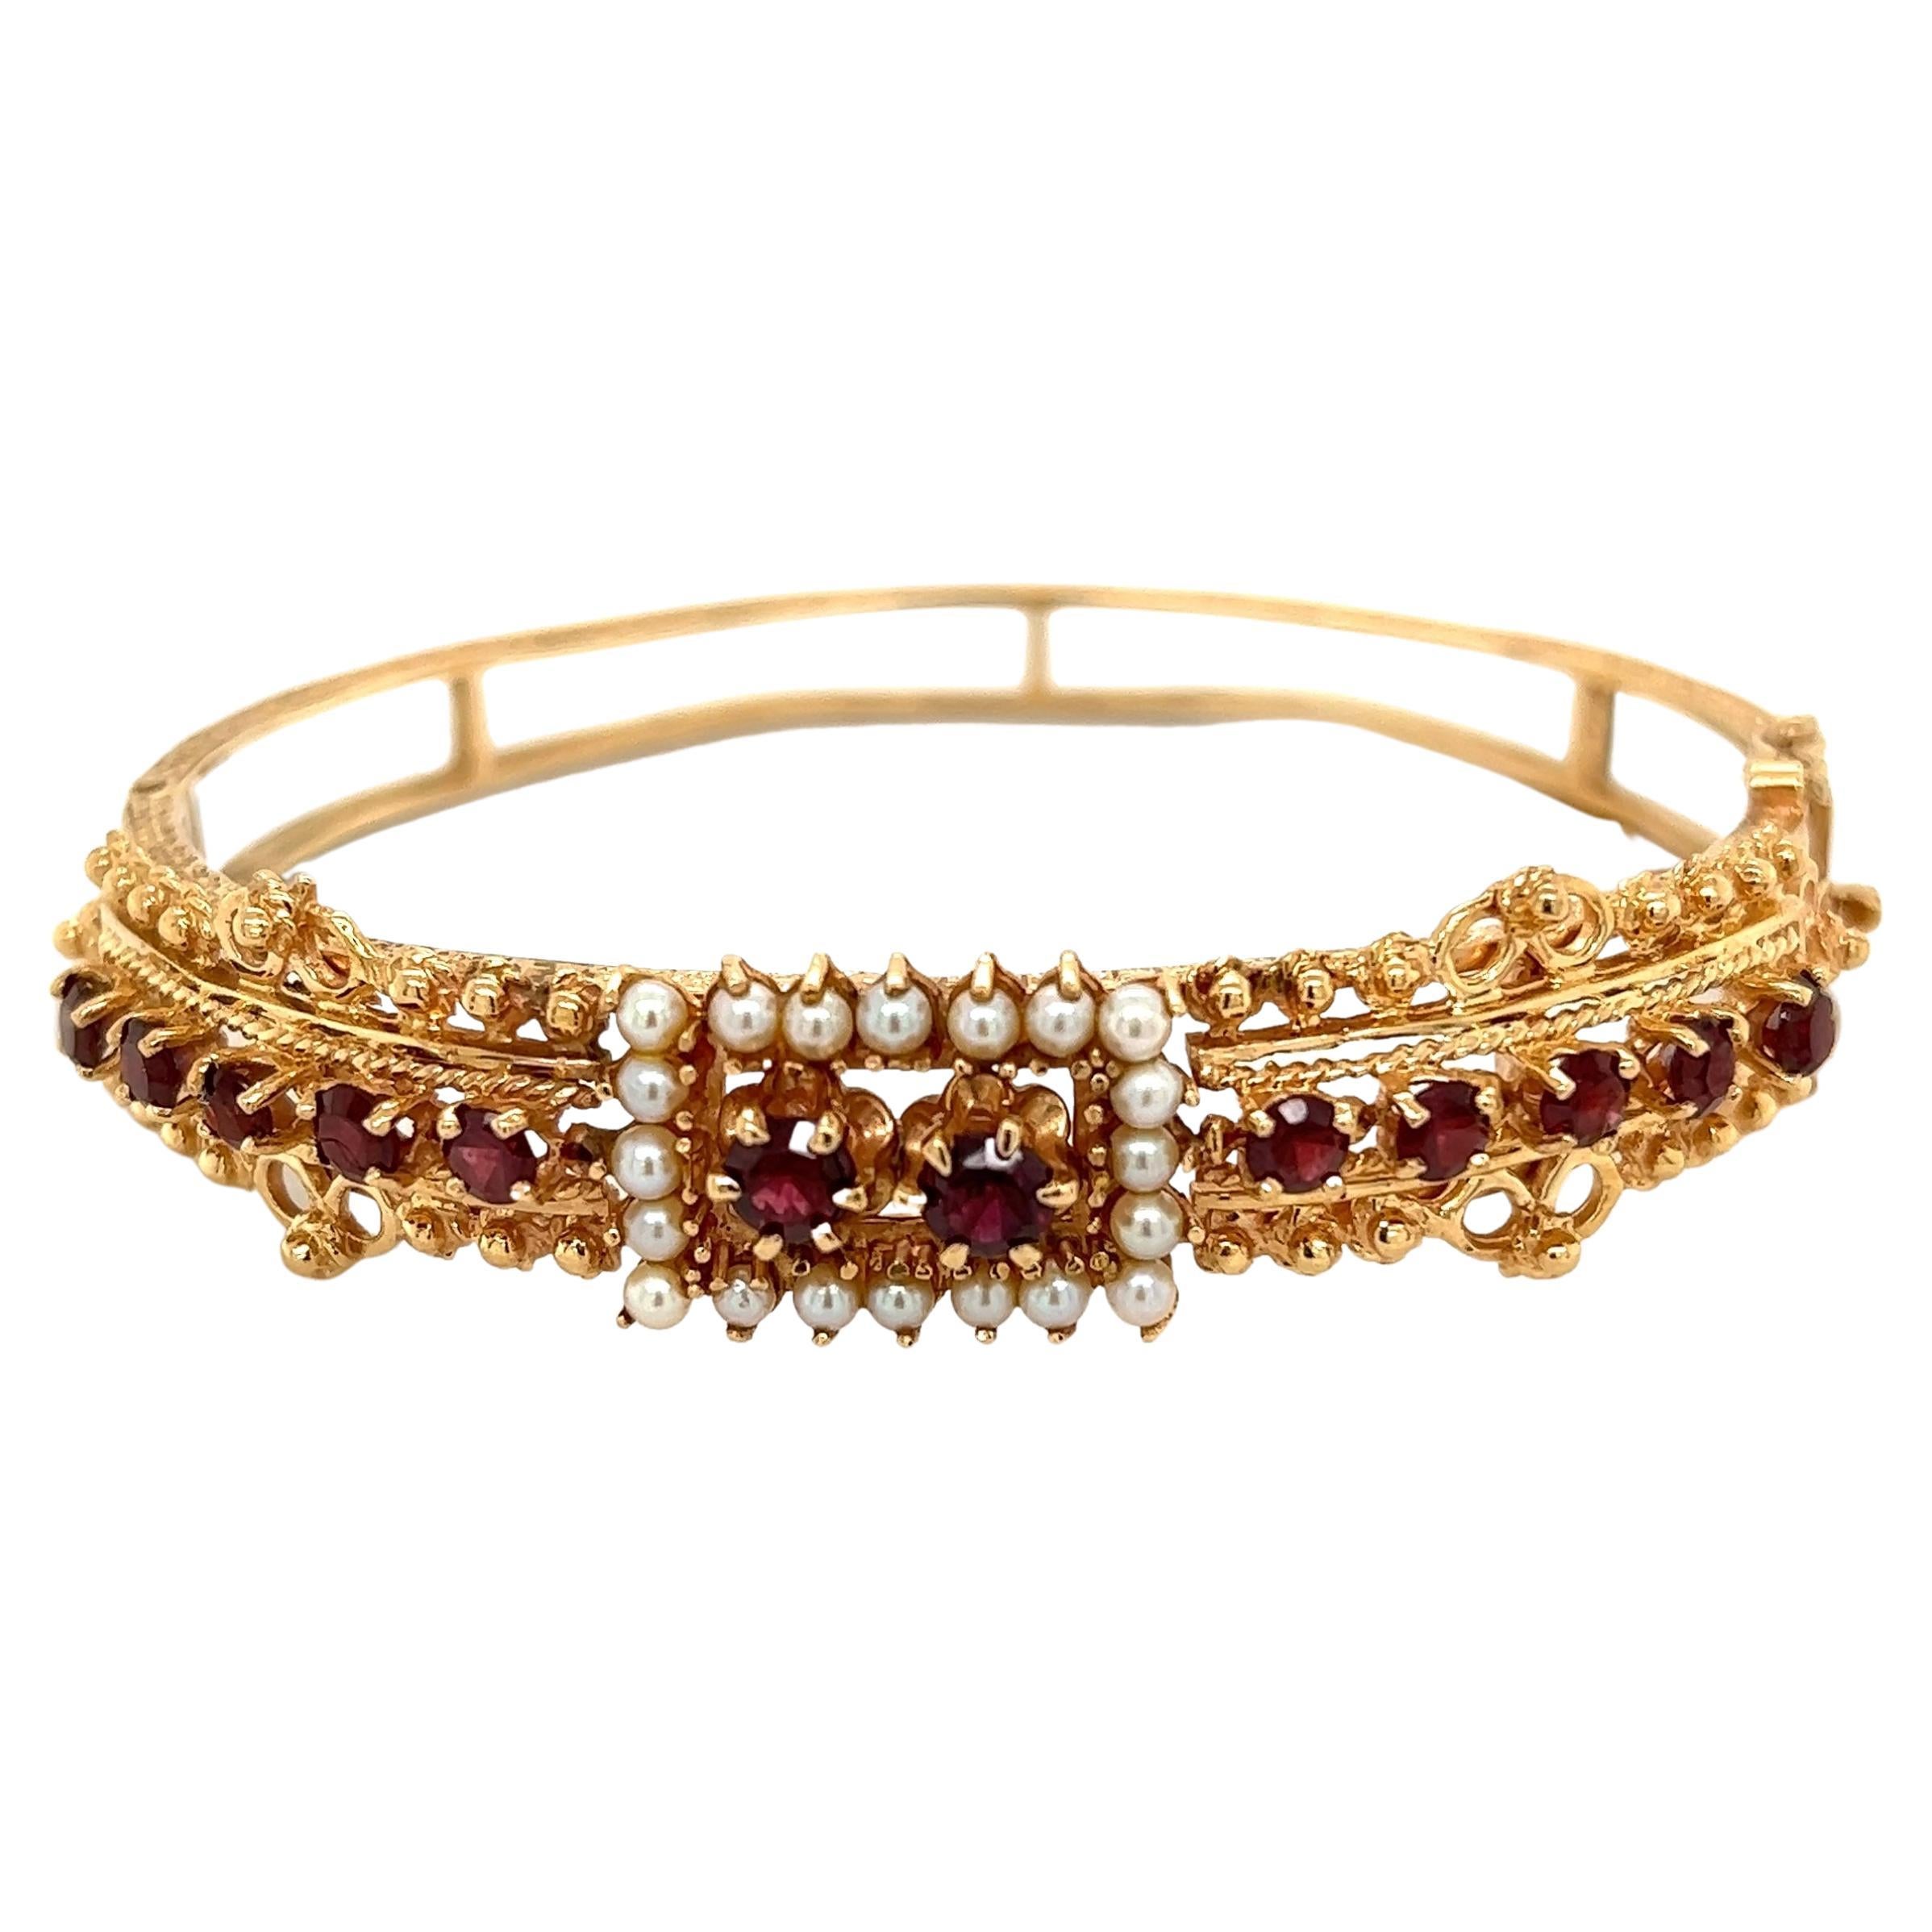 Garnet and Seed Pearl Victorian Revival Gold Cuff Bangle Bracelet For Sale